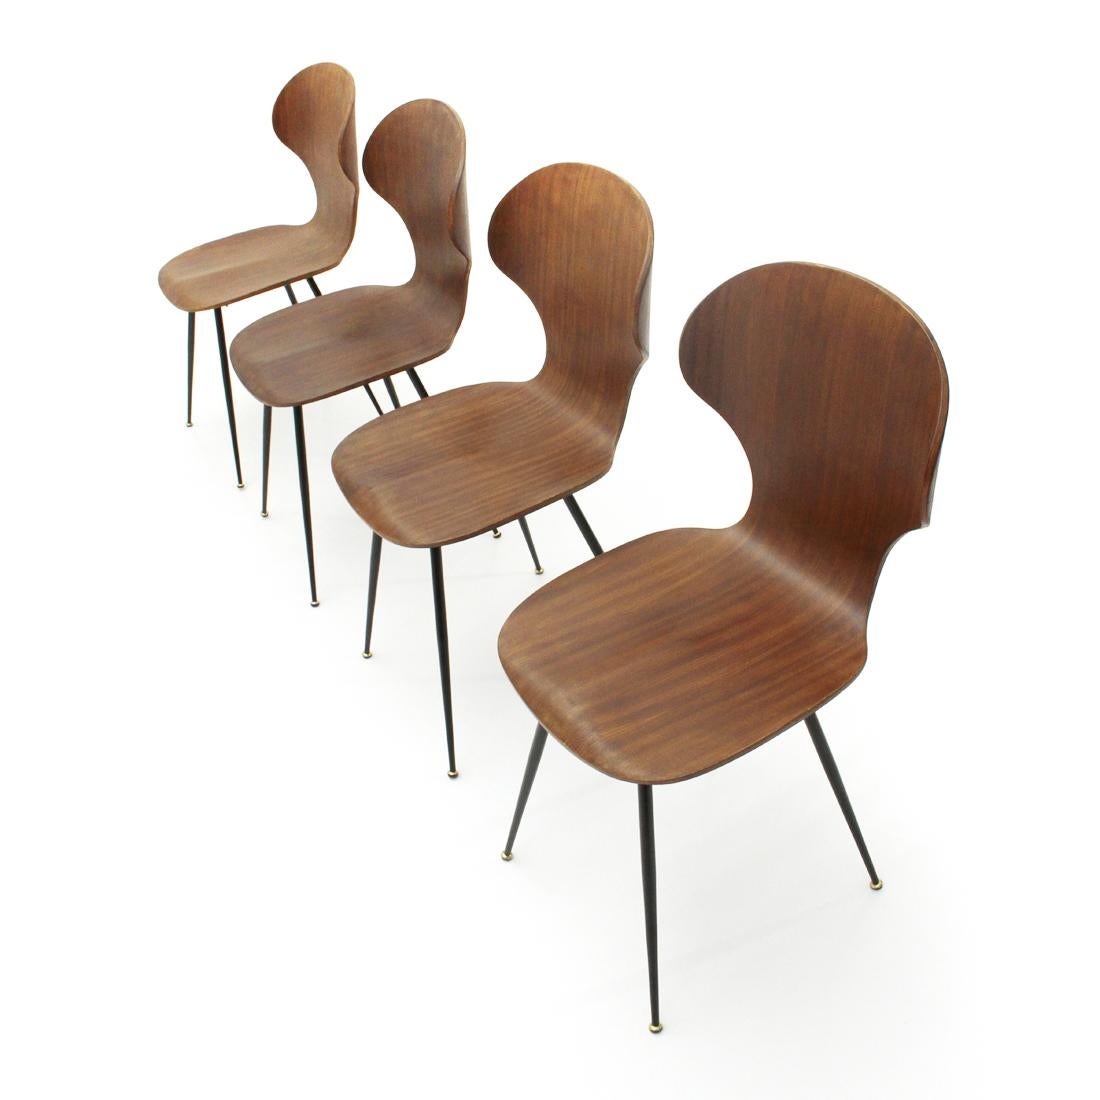 Metal Lully Plywood Chair by Carlo Ratti for Industria Legni Curvati, Set of Four